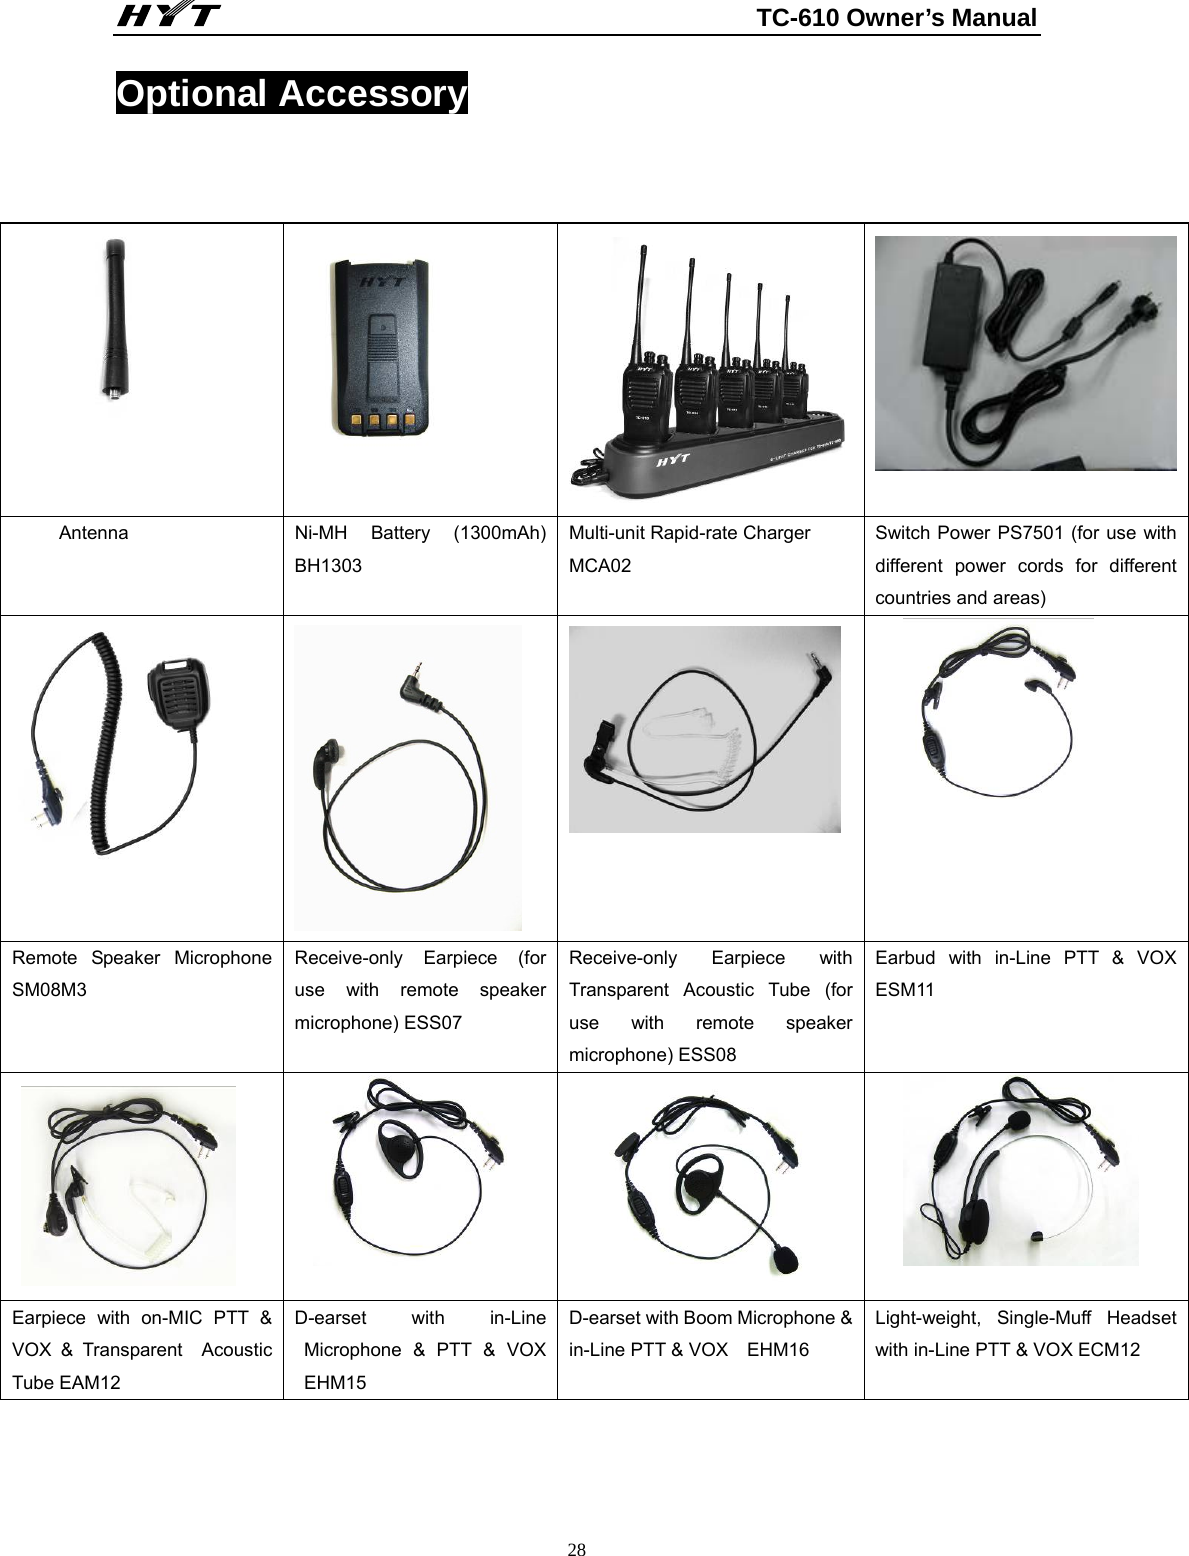                                                          TC-610 Owner’s Manual  28Optional Accessory      Antenna   Ni-MH Battery (1300mAh) BH1303 Multi-unit Rapid-rate Charger MCA02 Switch Power PS7501 (for use with different power cords for different countries and areas)     Remote Speaker Microphone SM08M3 Receive-only Earpiece (for use with remote speaker microphone) ESS07 Receive-only Earpiece with Transparent Acoustic Tube (for use with remote speaker microphone) ESS08 Earbud with in-Line PTT &amp; VOX ESM11     Earpiece with on-MIC PTT &amp; VOX &amp; Transparent  Acoustic Tube EAM12 D-earset with in-Line Microphone &amp; PTT &amp; VOX EHM15 D-earset with Boom Microphone &amp; in-Line PTT &amp; VOX    EHM16 Light-weight, Single-Muff Headset with in-Line PTT &amp; VOX ECM12 